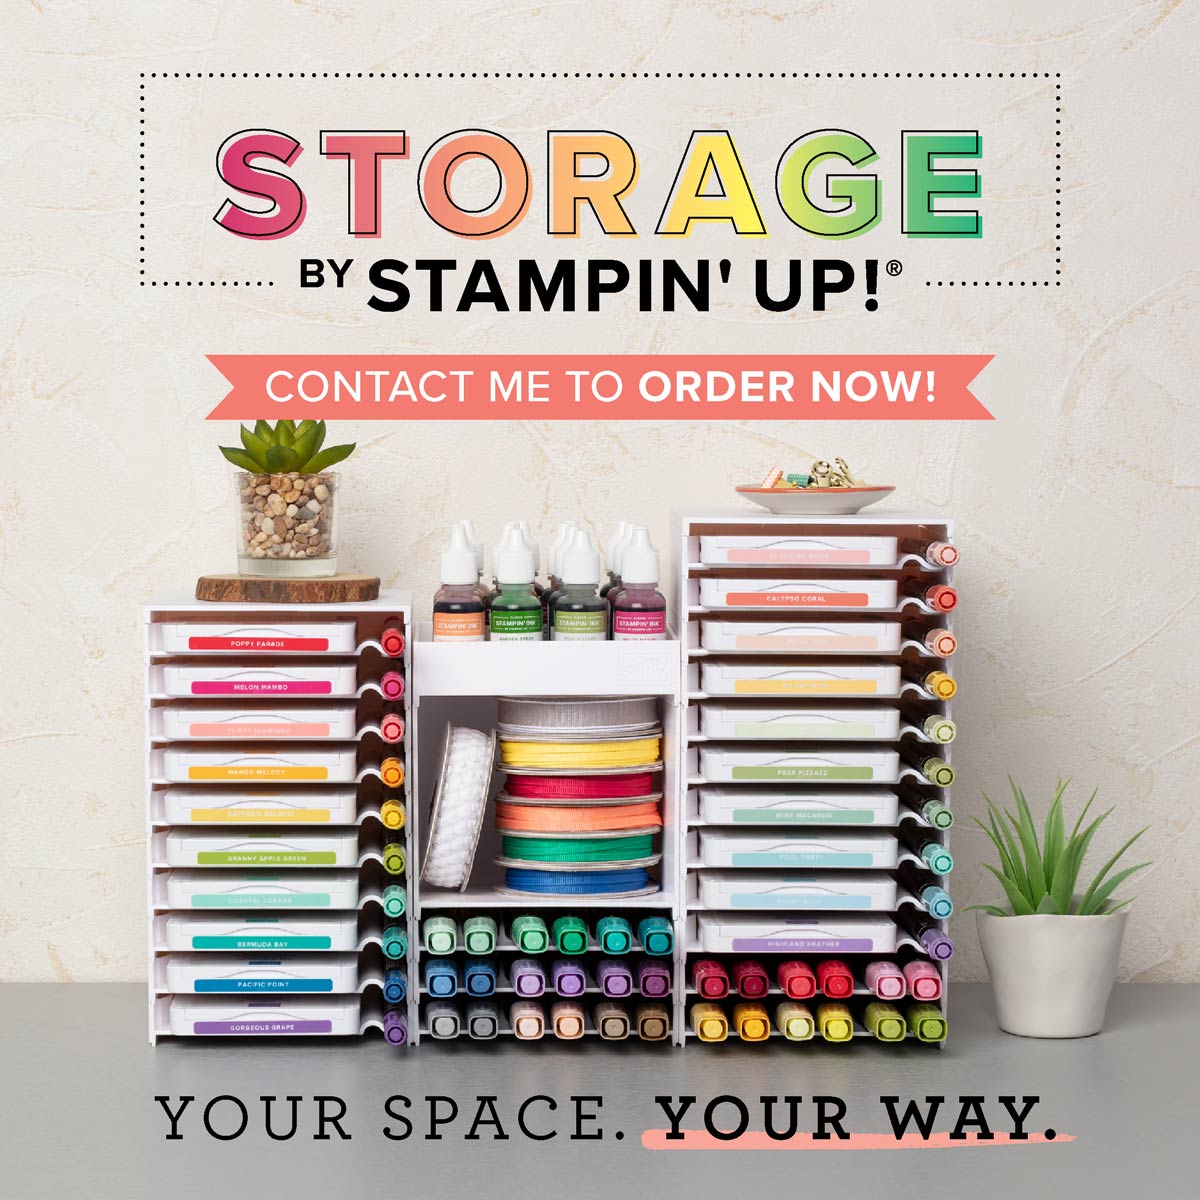 New Stampin' Storage System from Stampin' Up! details: www.thestampcamp.com #stampinup #thestampcamp #storage #stamps